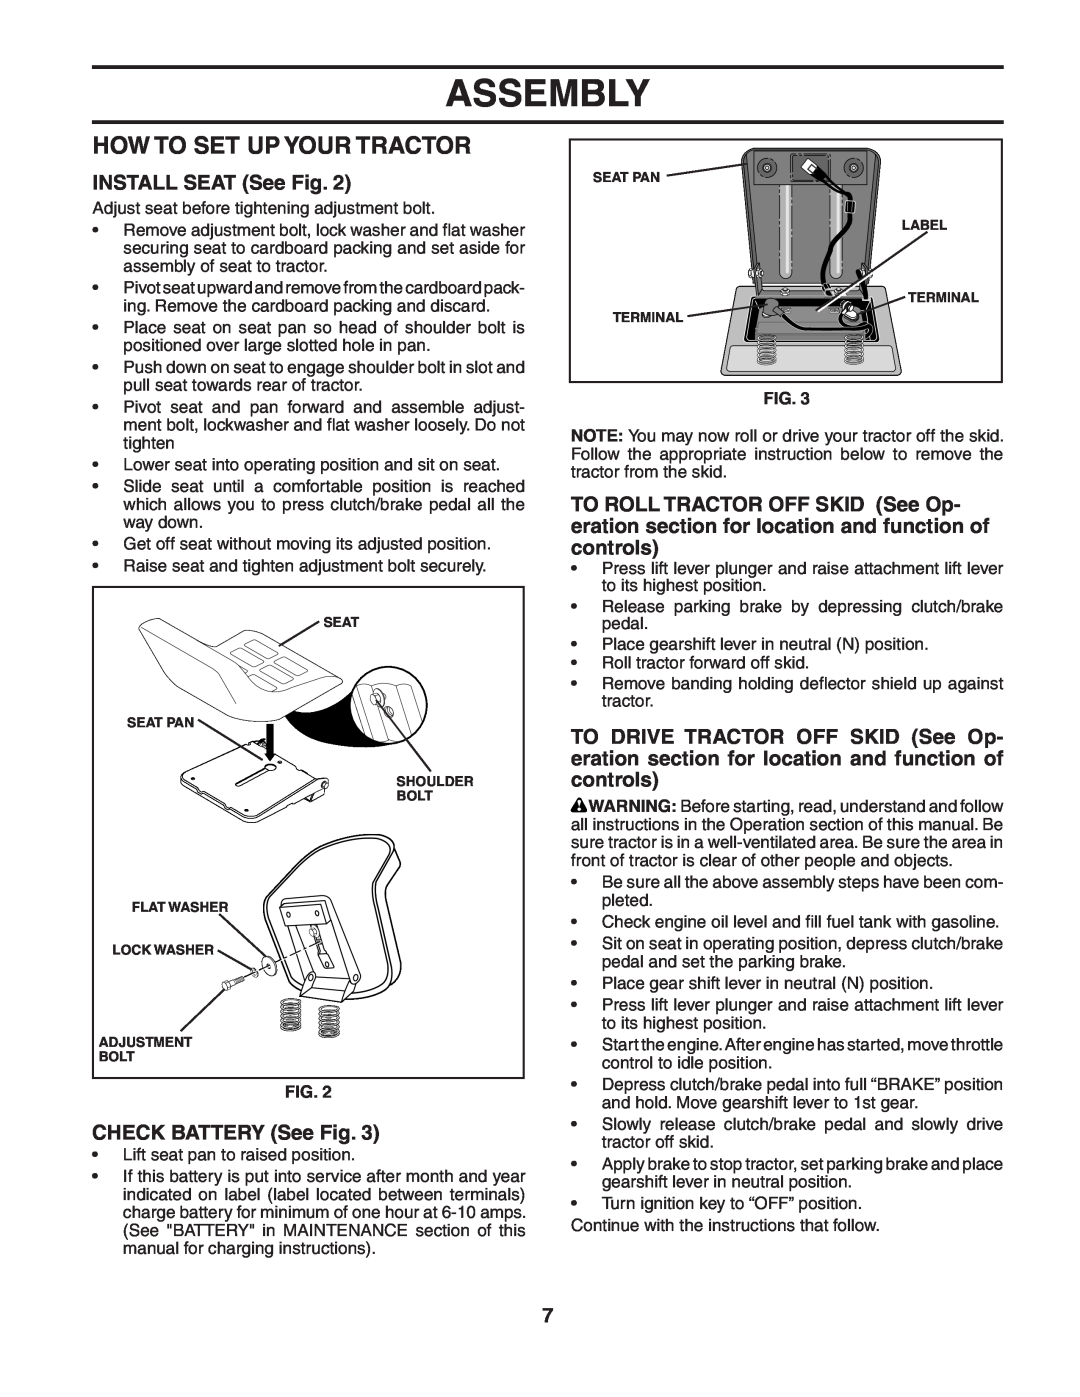 Weed Eater WET2242STB manual How To Set Up Your Tractor, INSTALL SEAT See Fig, CHECK BATTERY See Fig, Assembly 